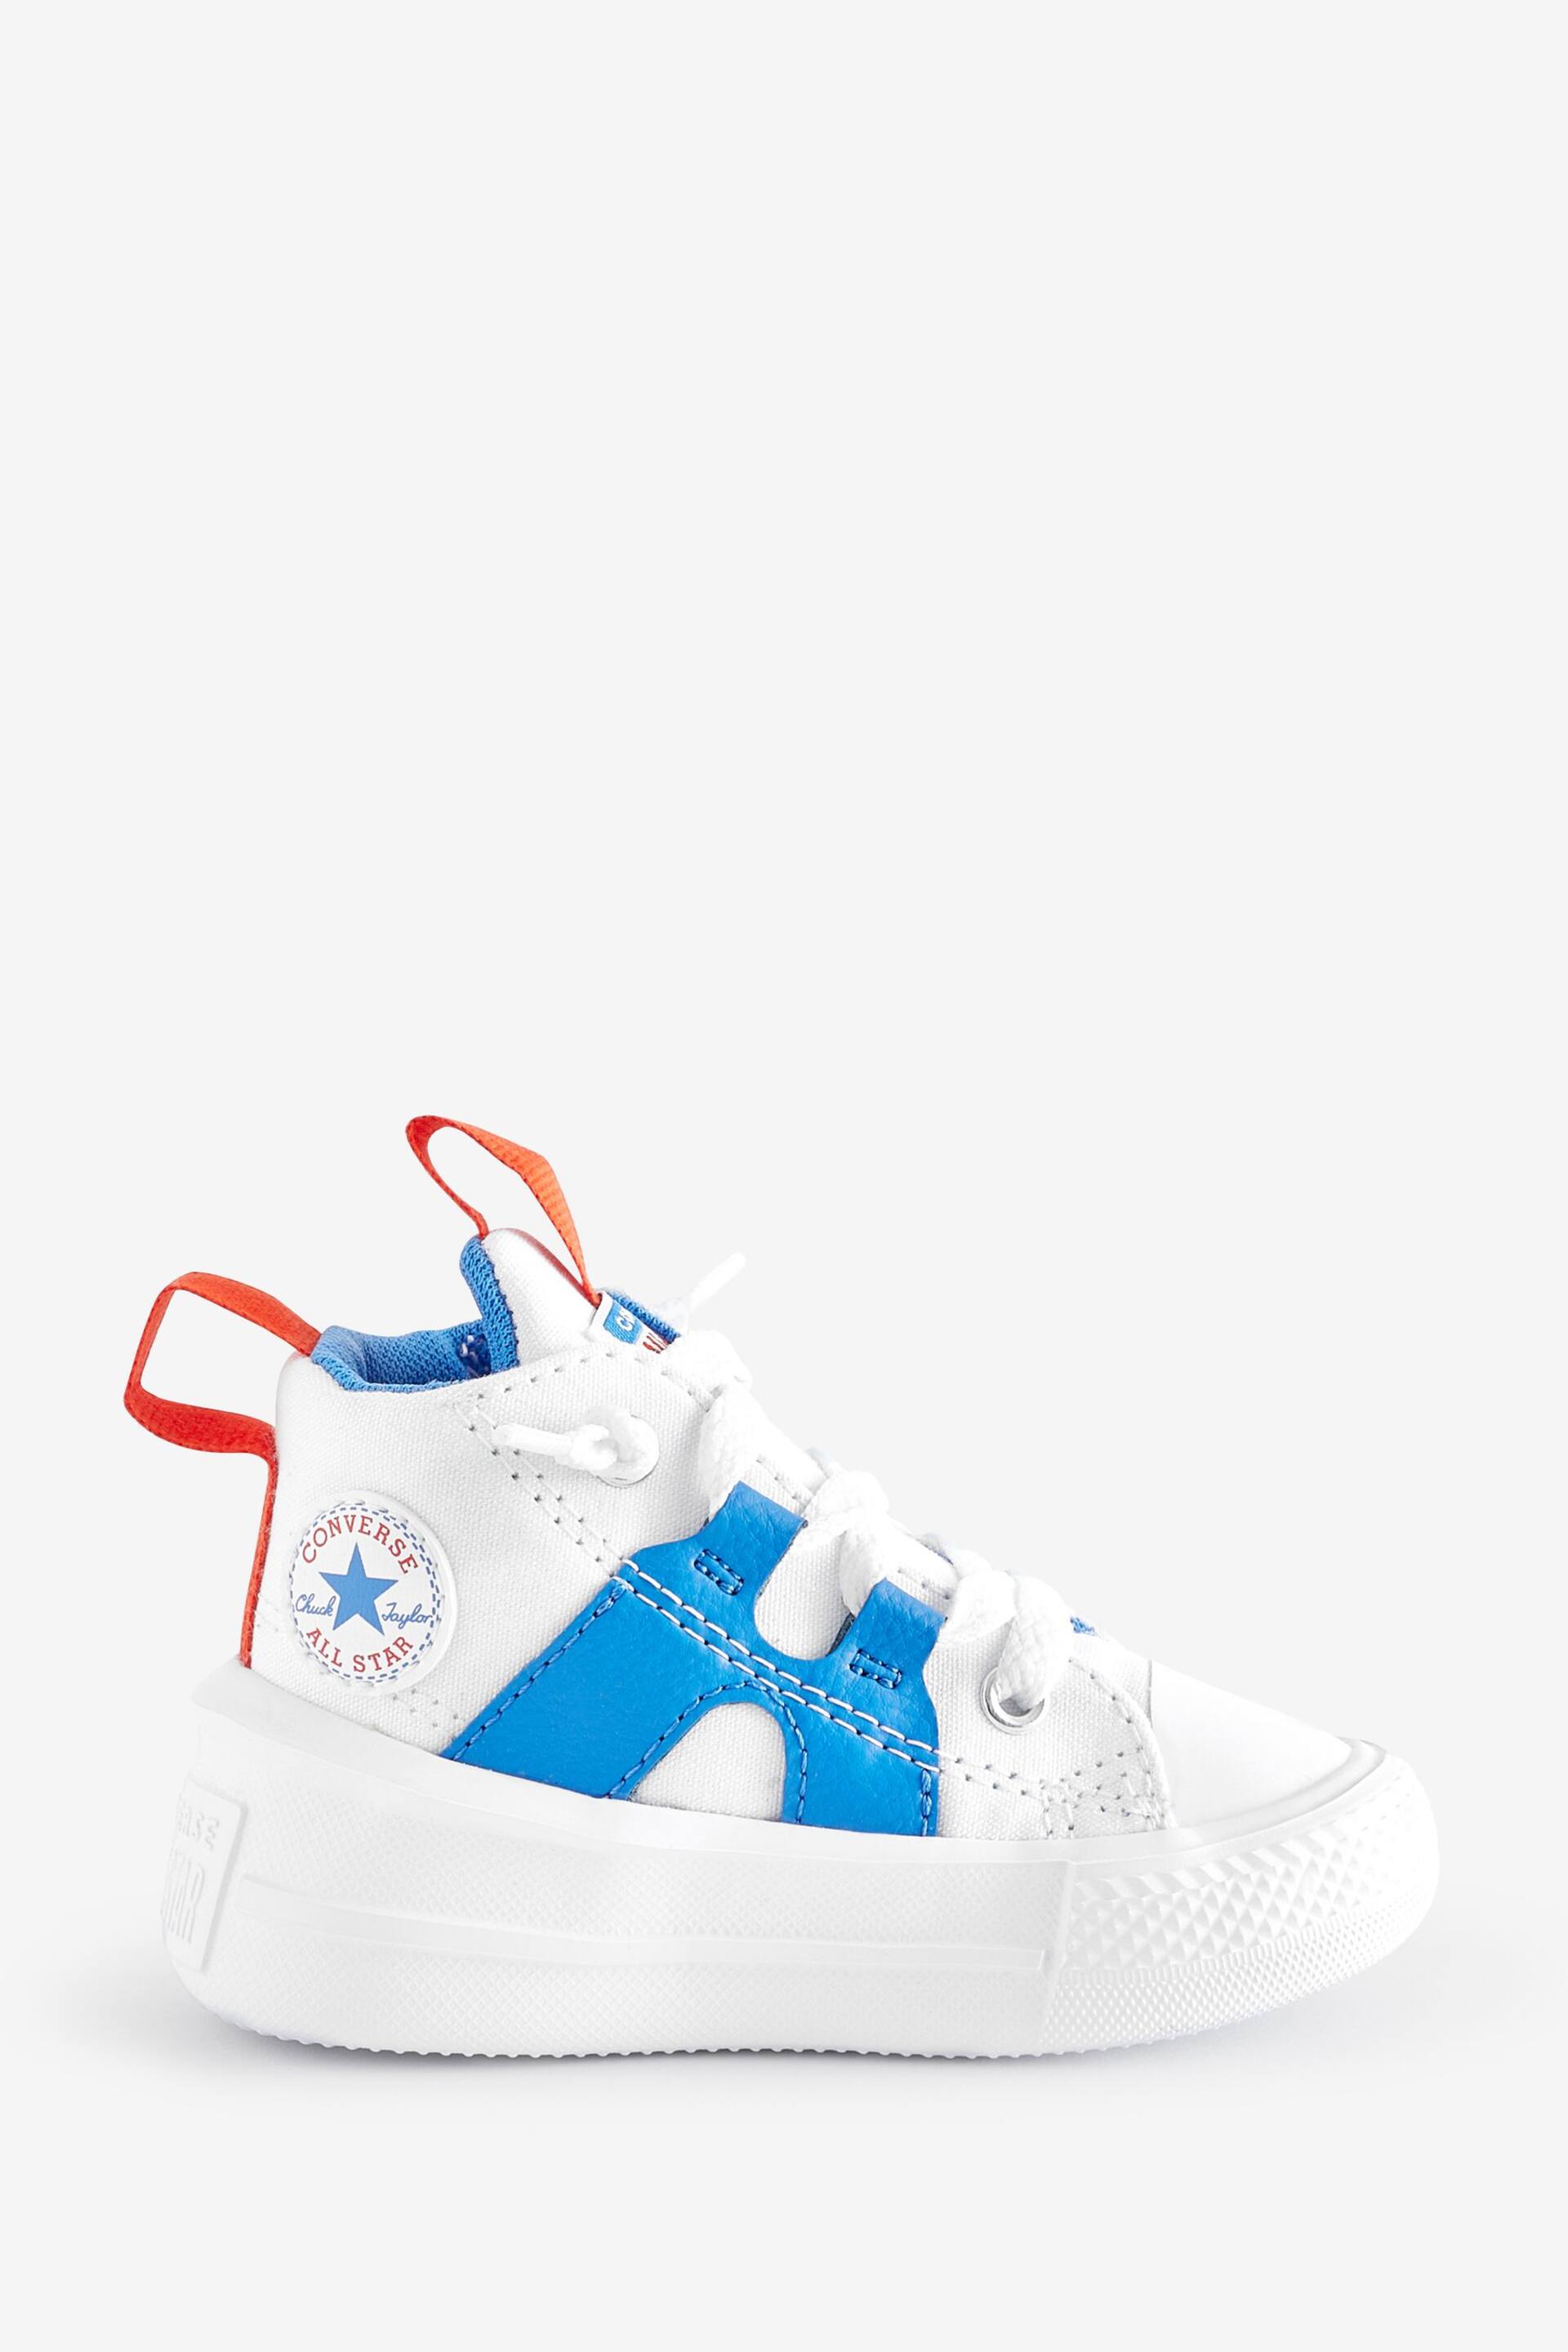 Converse White Ultra Trainers - Image 1 of 9